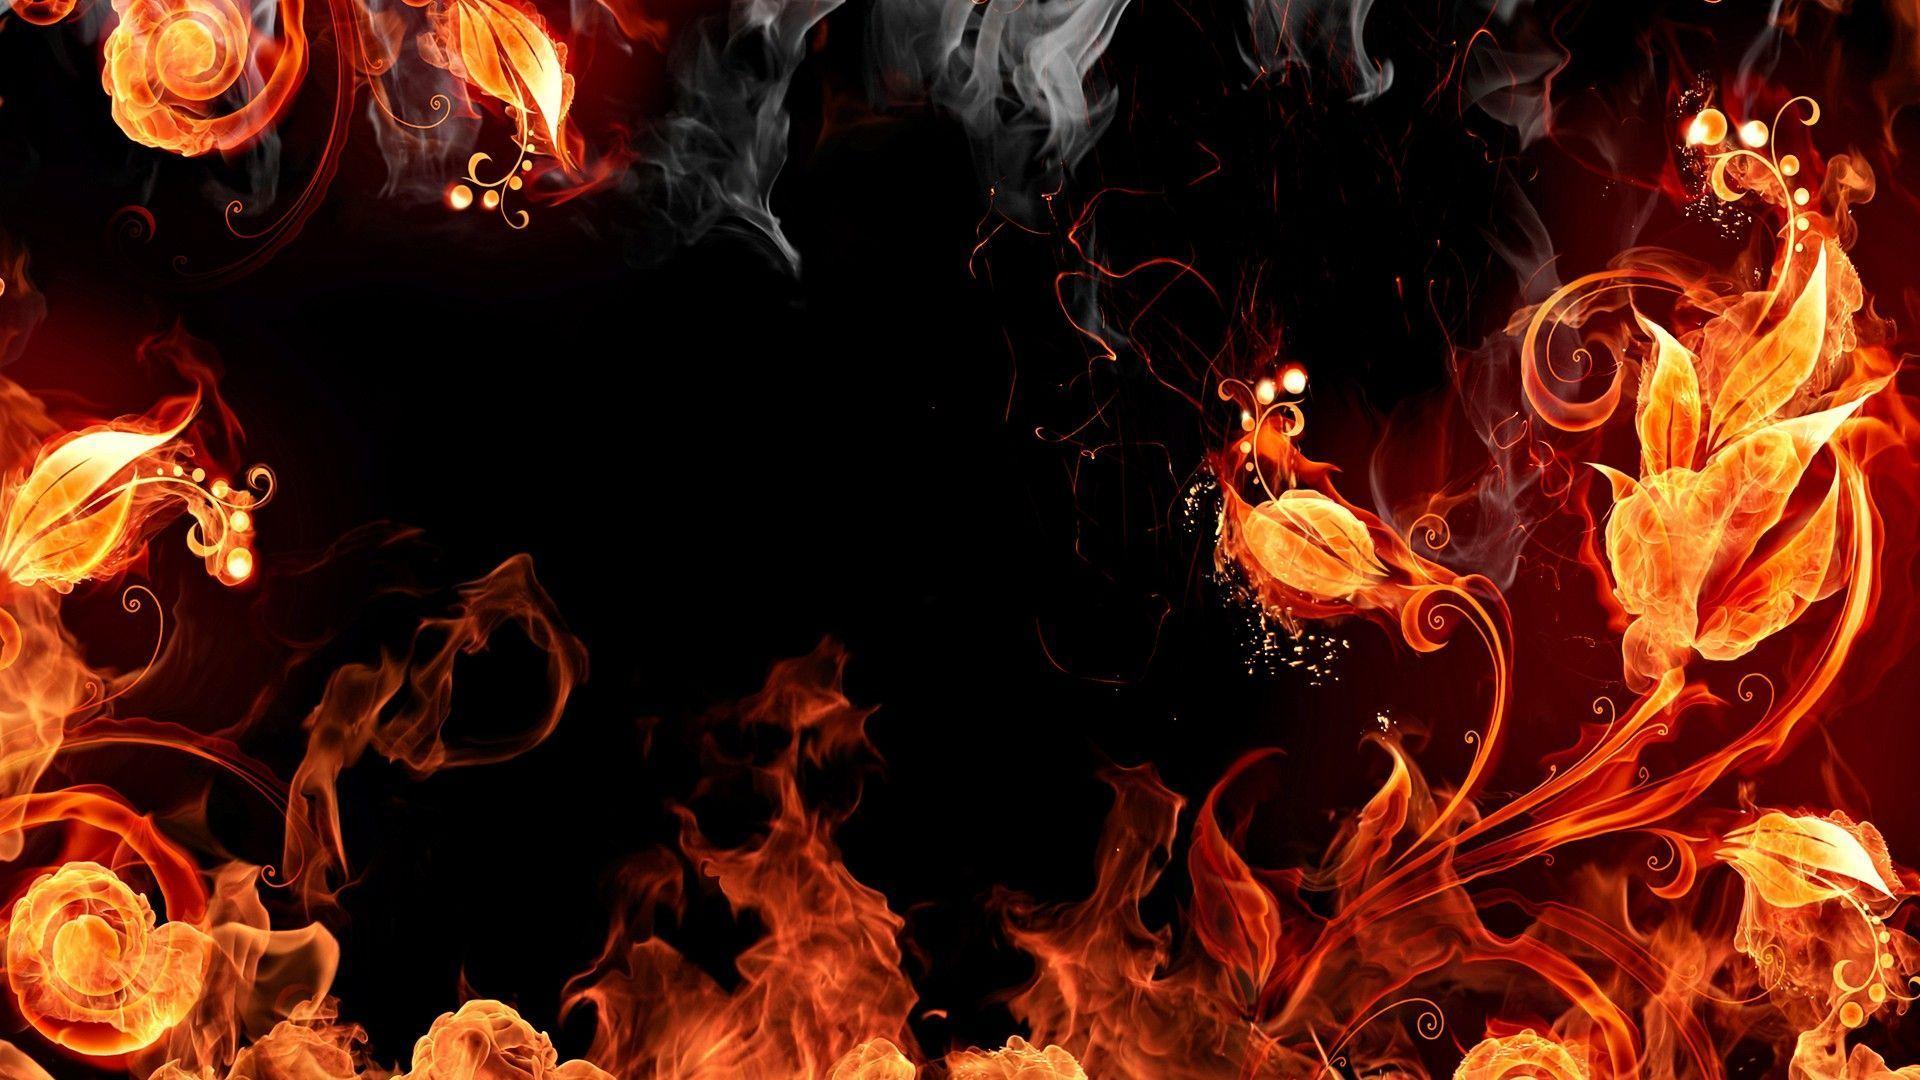 Dragon With Fire In Black Background HD Fire Wallpapers  HD Wallpapers   ID 54319